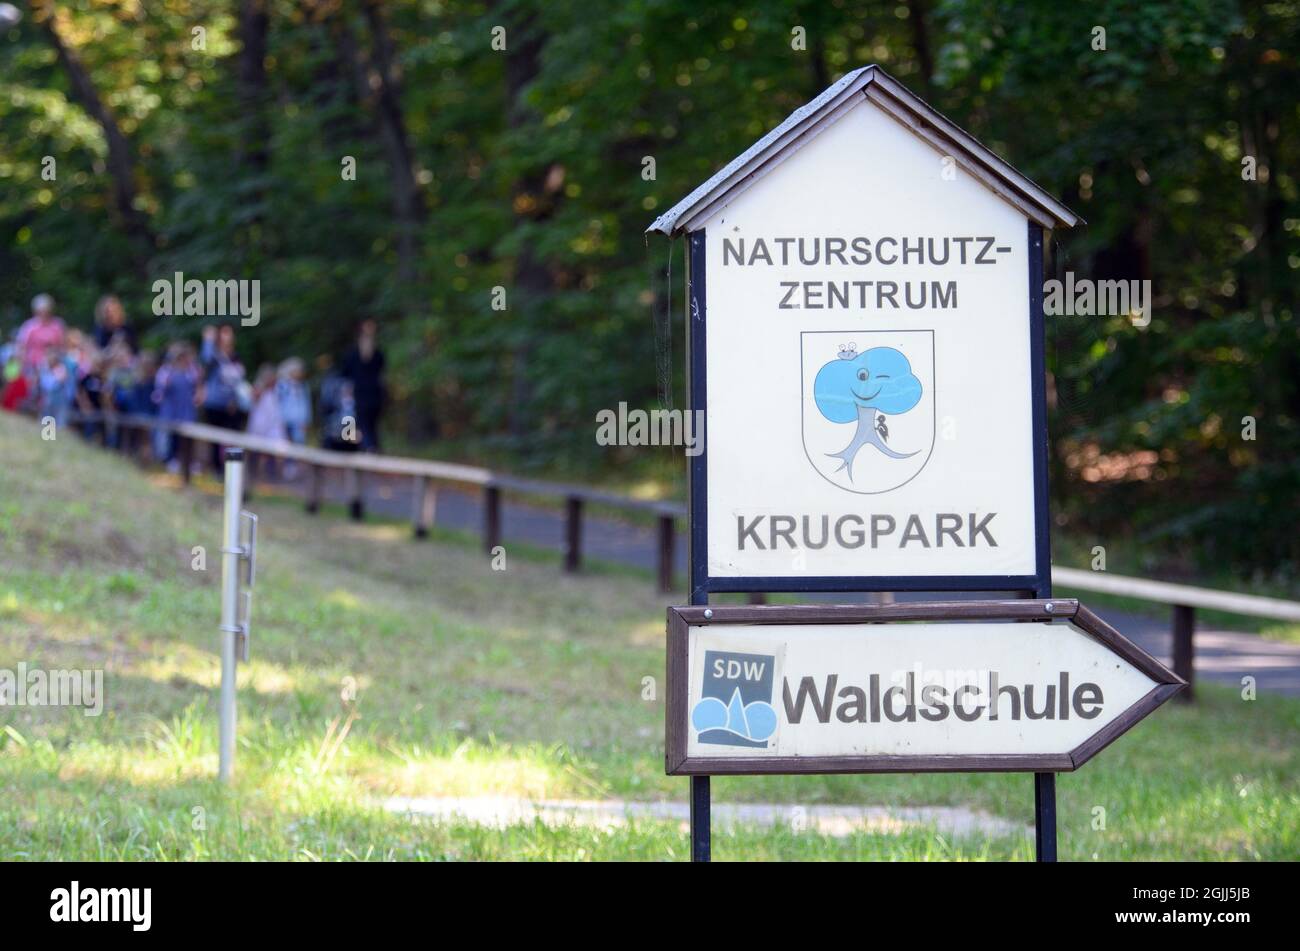 Brandenburg, Germany. September 10 2021: : A sign stands in front the entrance to the Krugpark Conservation Centre in Wilhelmsdorf. The nature conservation centre has a forest school, an educational